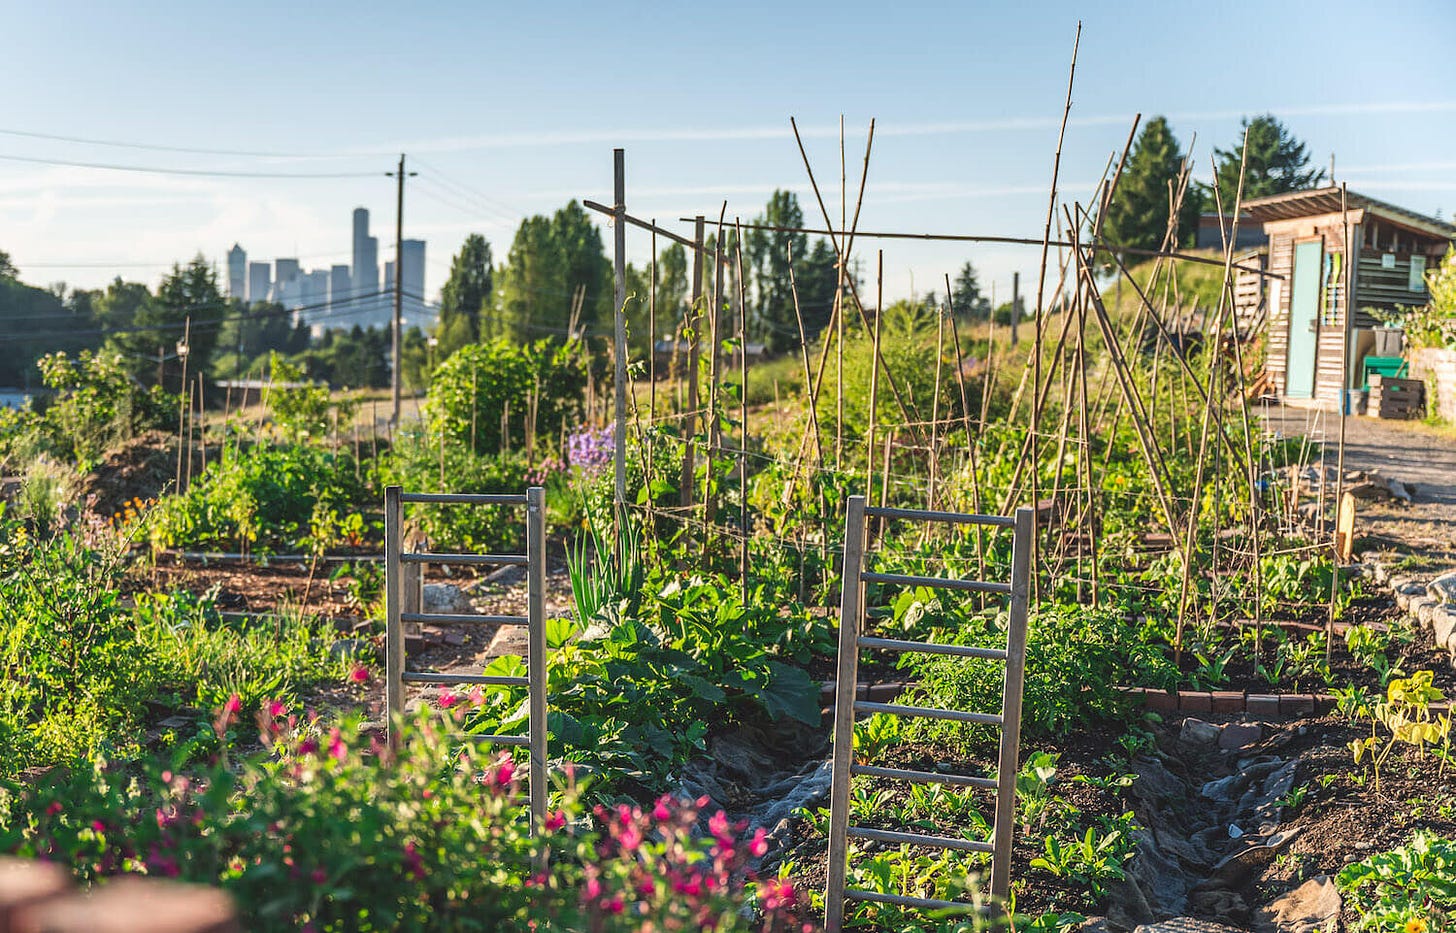 Beacon Food Forest